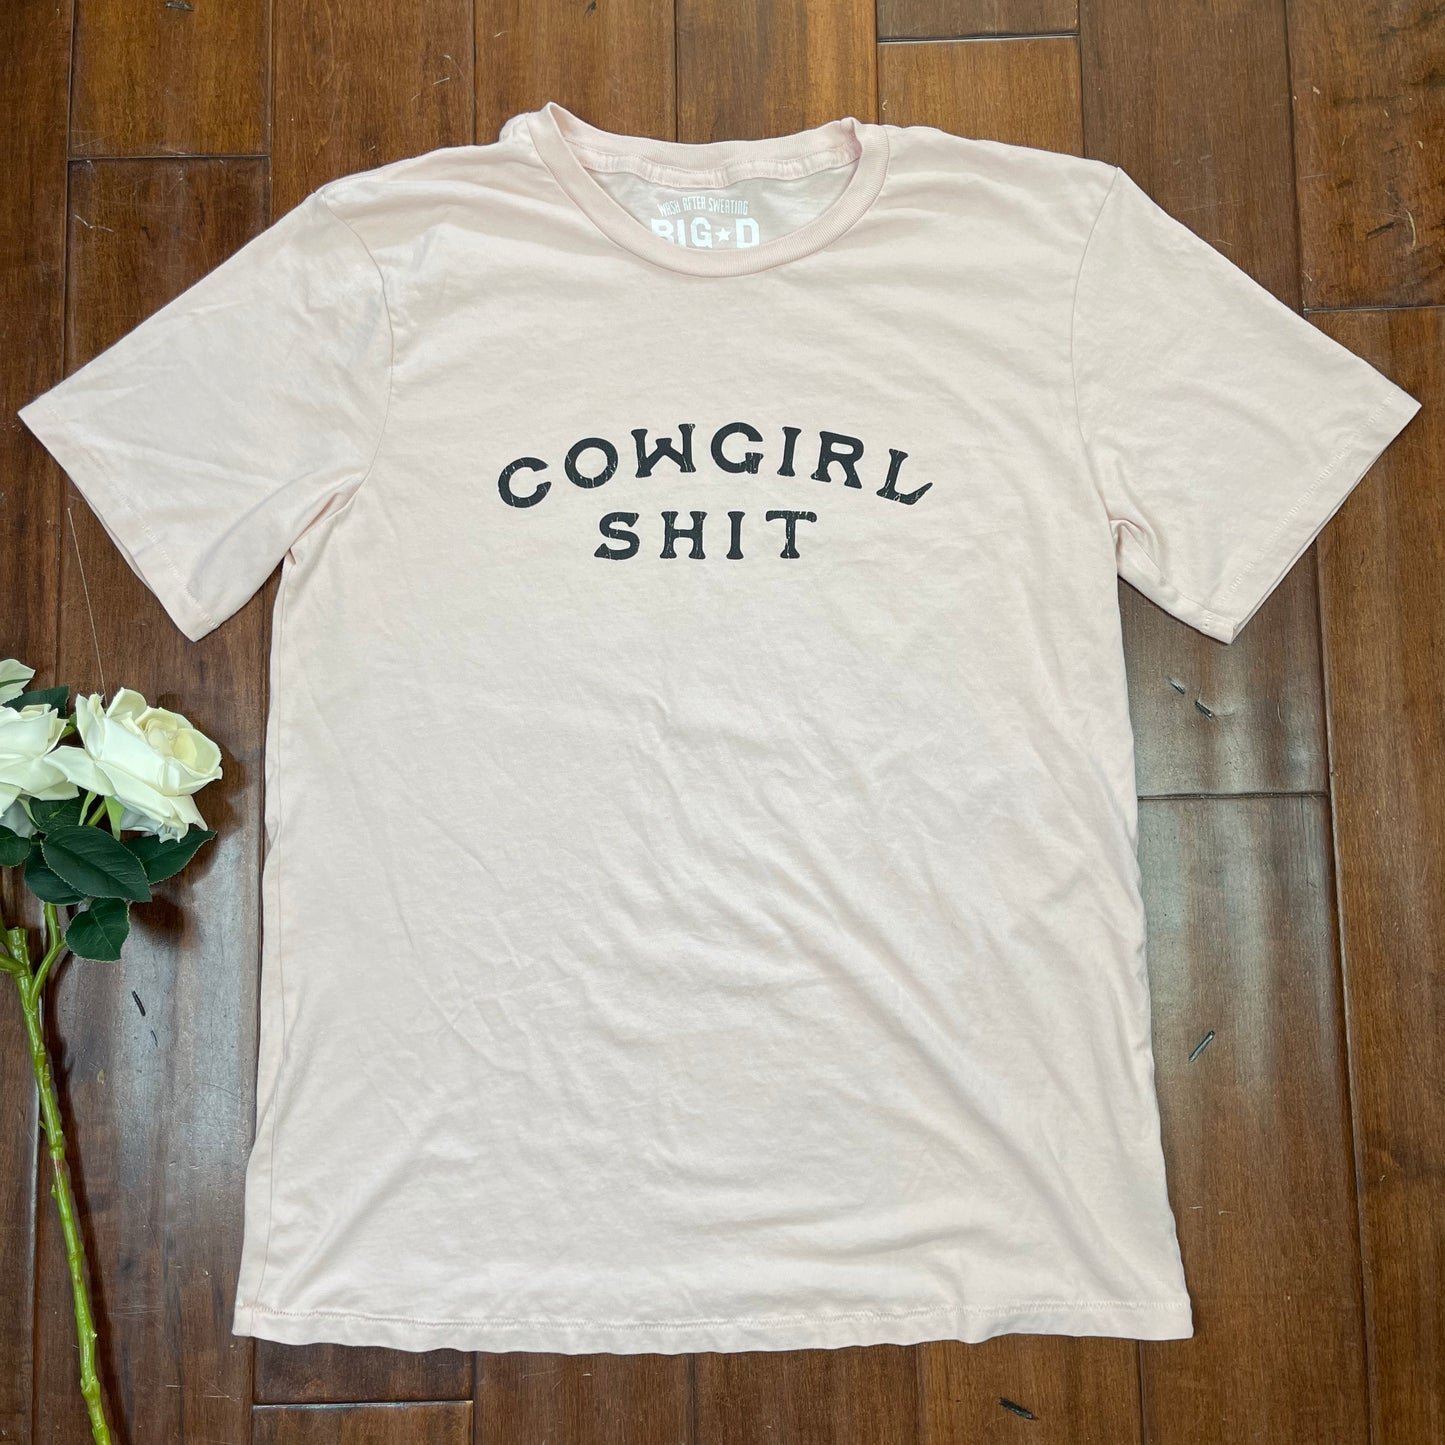 THRIFTED “COWGIRL SHIT” T-SHIRT